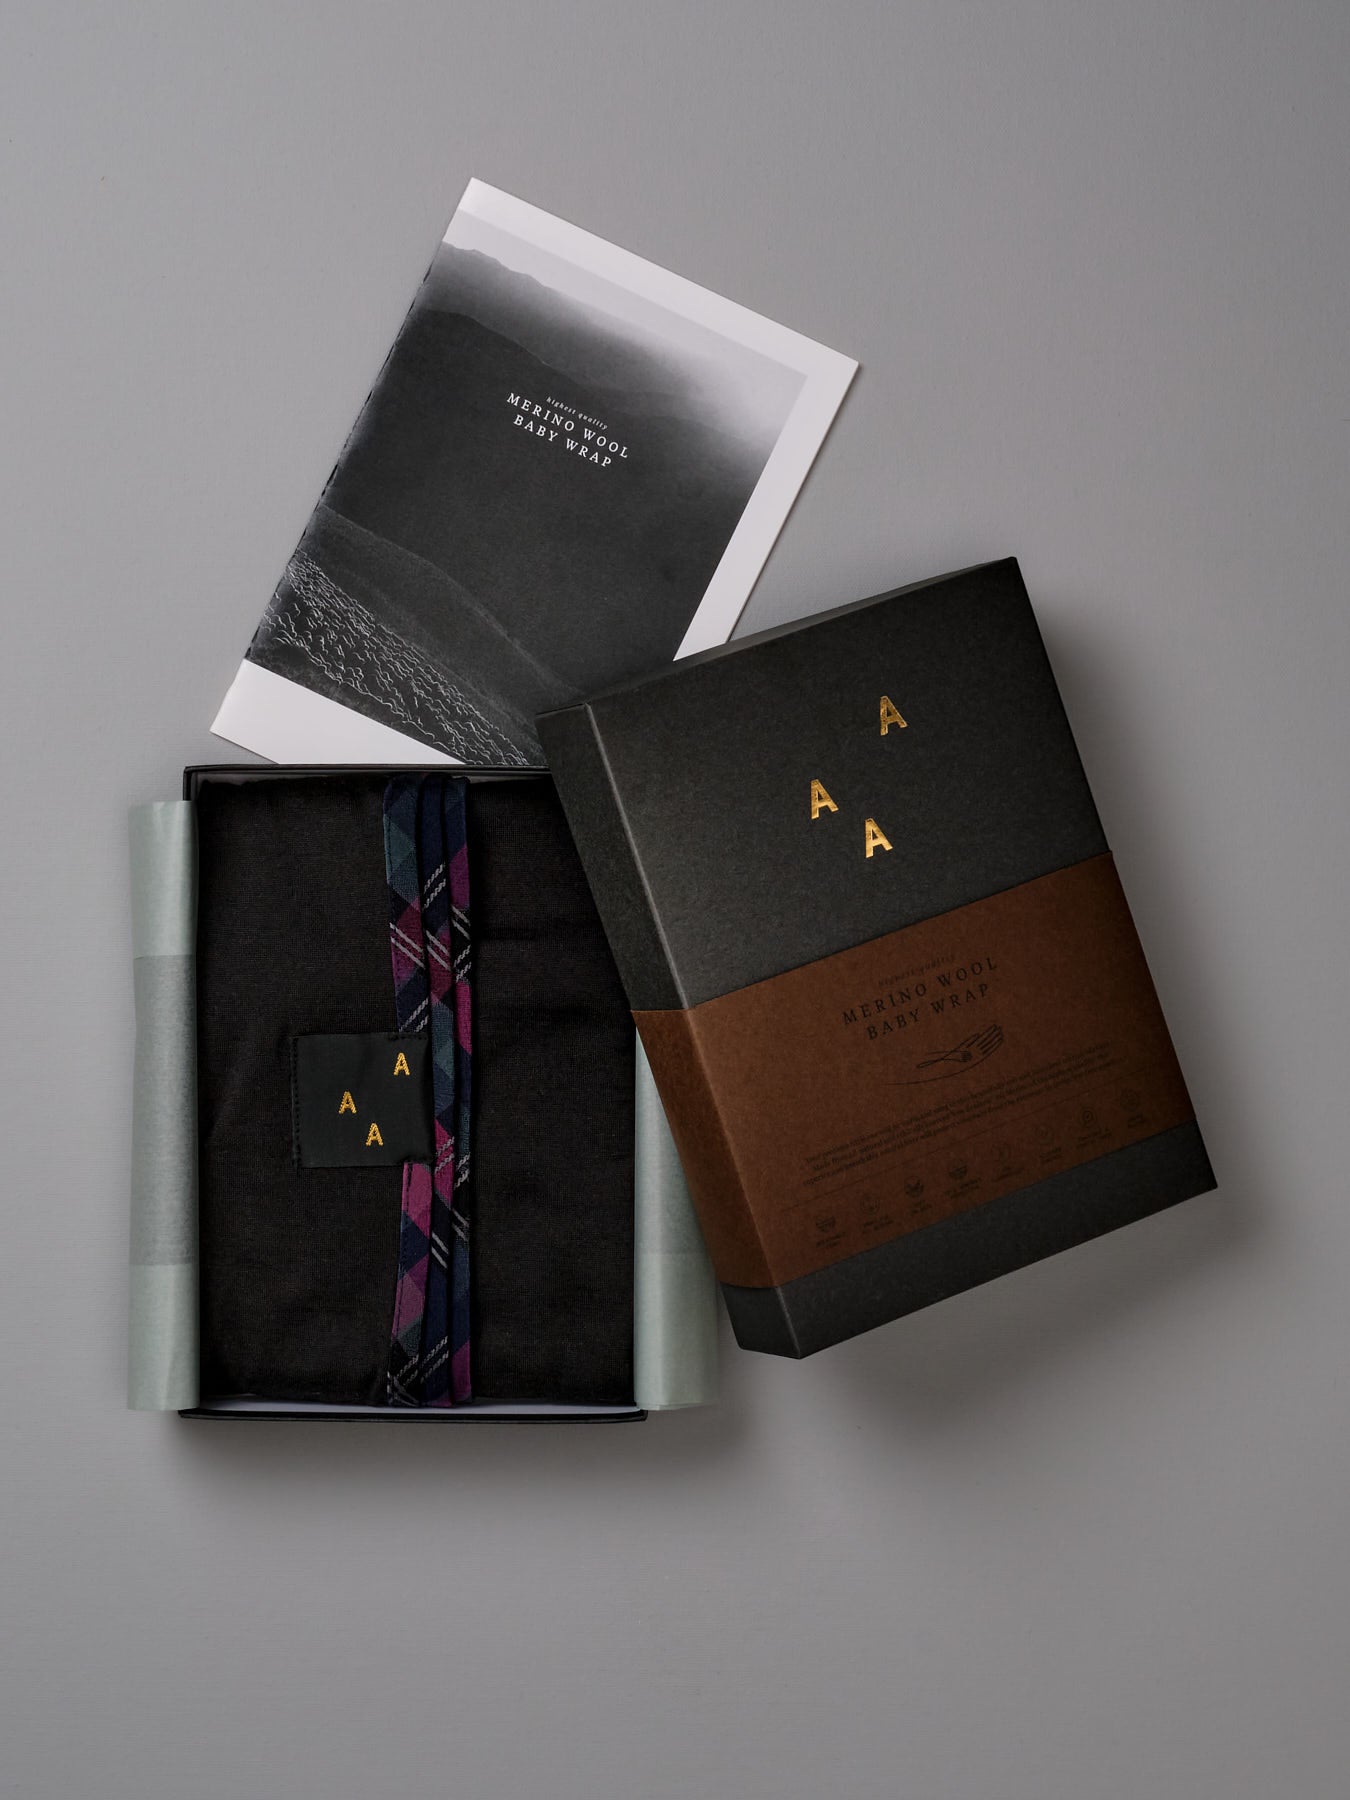 A Baby Merino Wrap - Black gift box with a card inside by AAA Design.